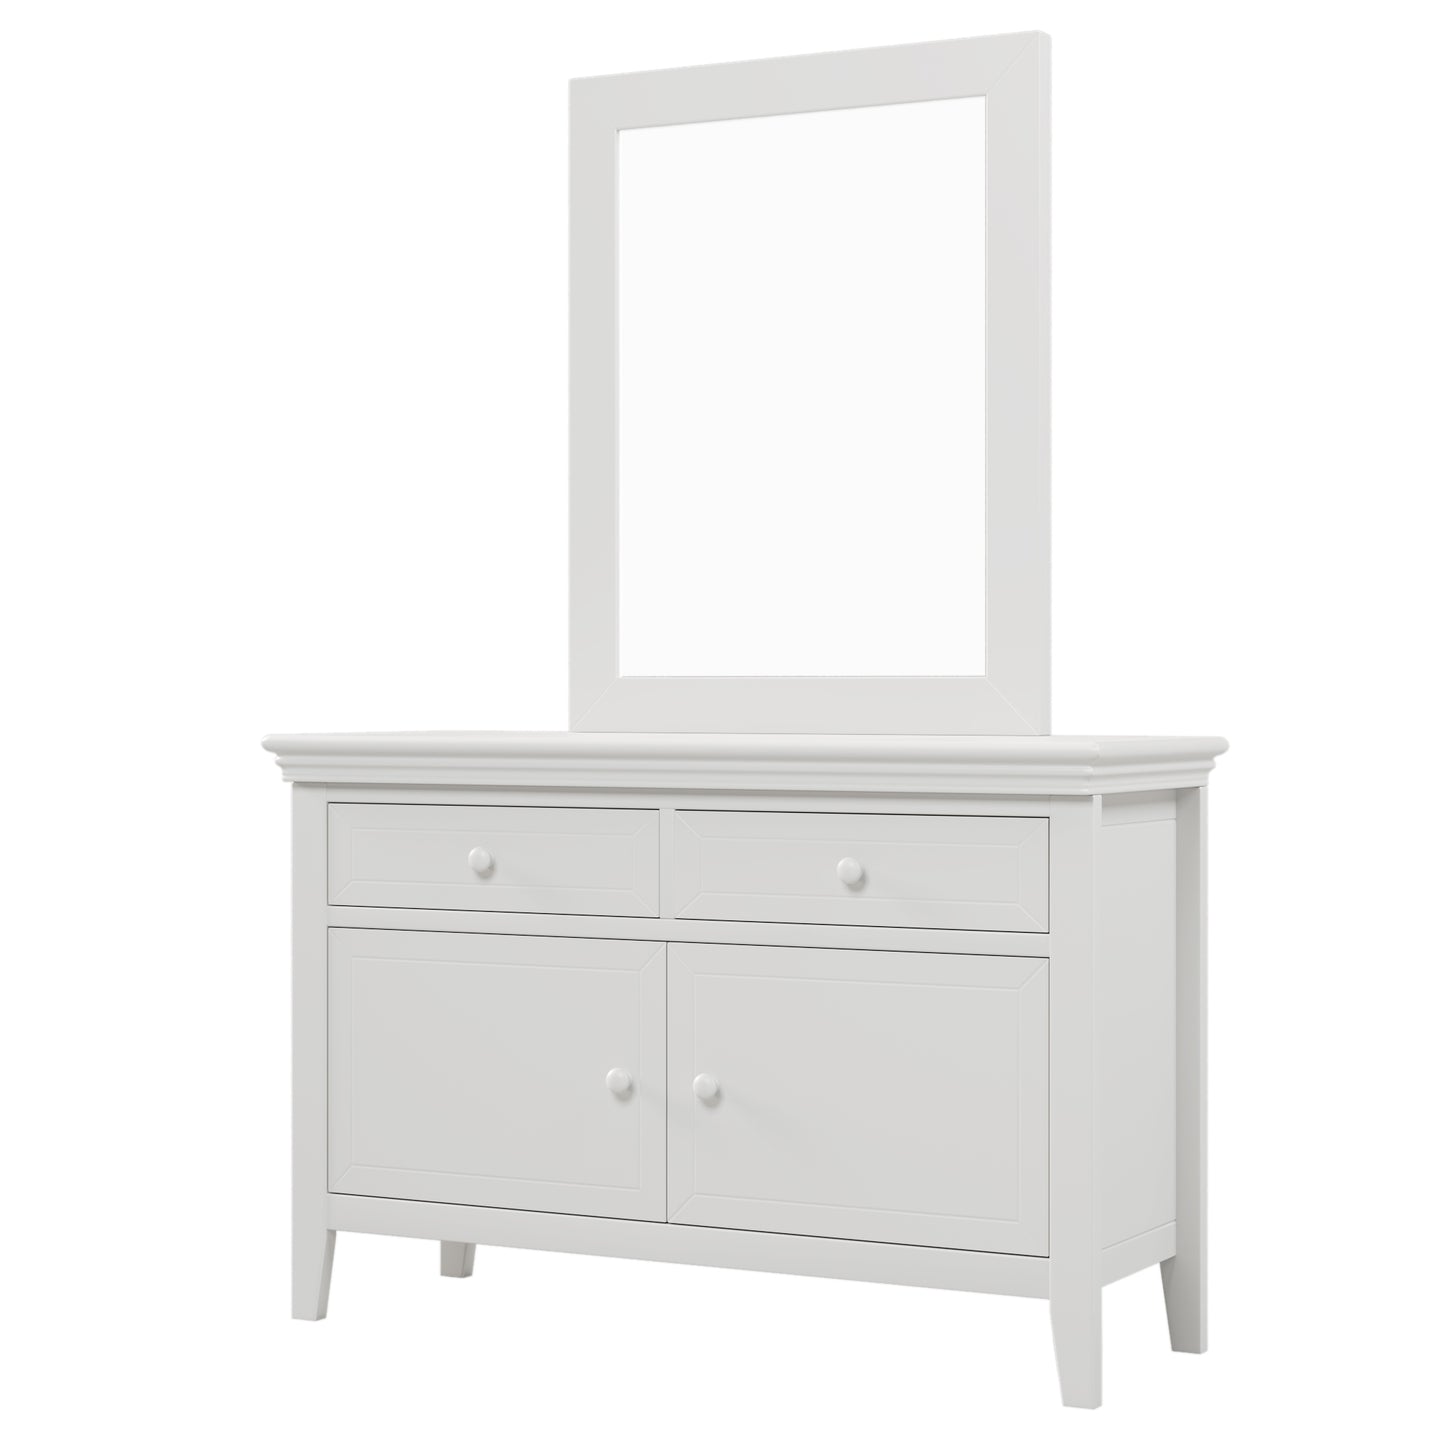 Traditional Concise Style White Solid Wood Dresser with Ample Storage Space Multiple Functions
Features